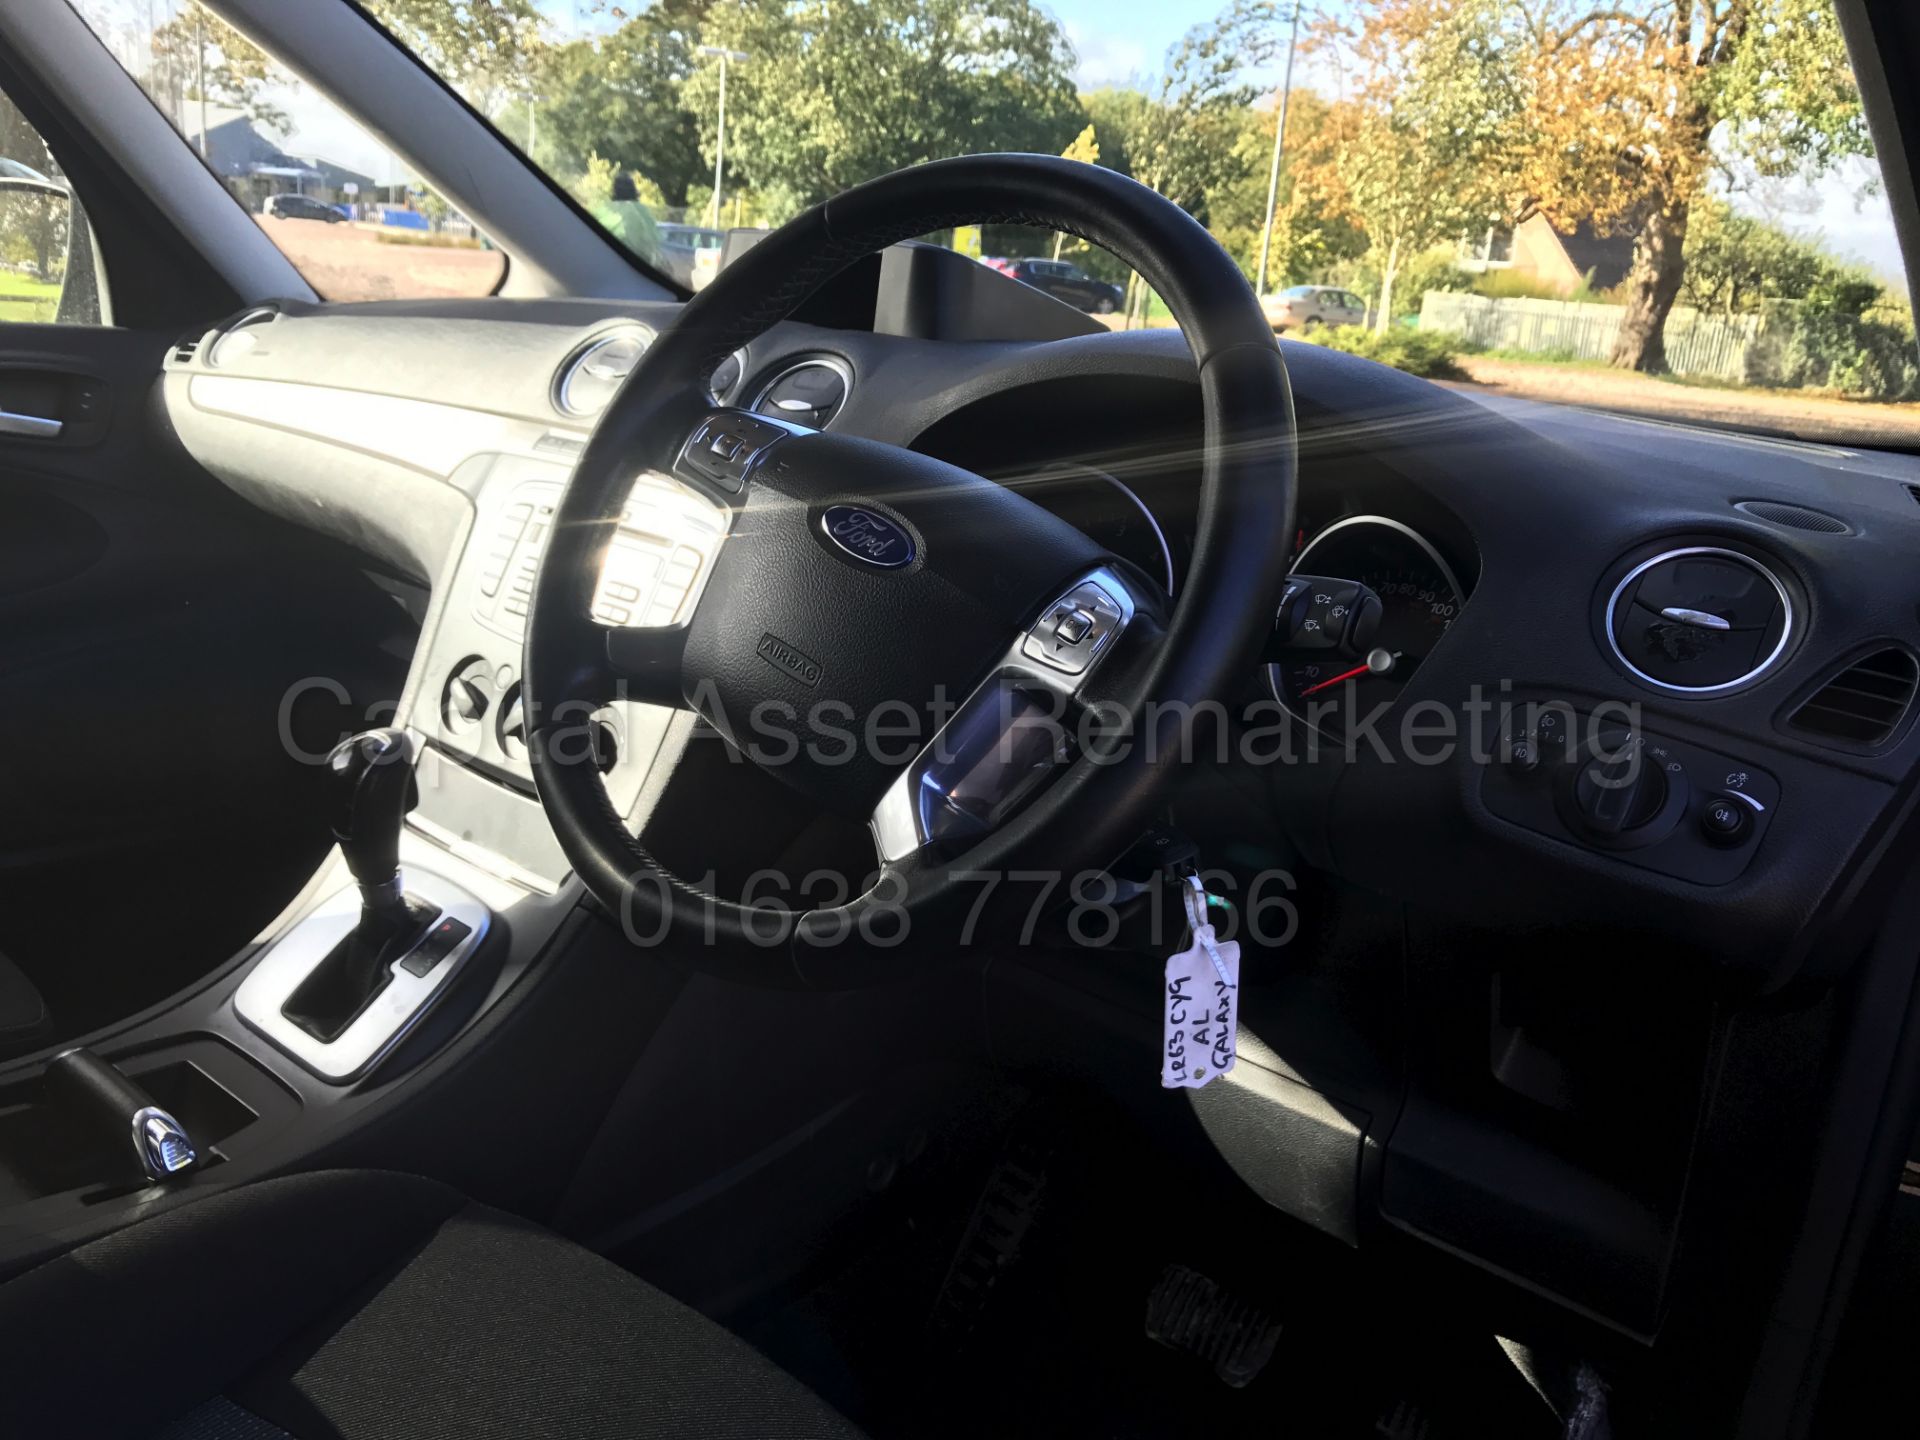 (ON SALE) FORD GALAXY 'ZETEC' 7 SEATER MPV (2014 MODEL) '2.0 TDCI -140 BHP' (1 OWNER) *FULL HISTORY* - Image 21 of 28